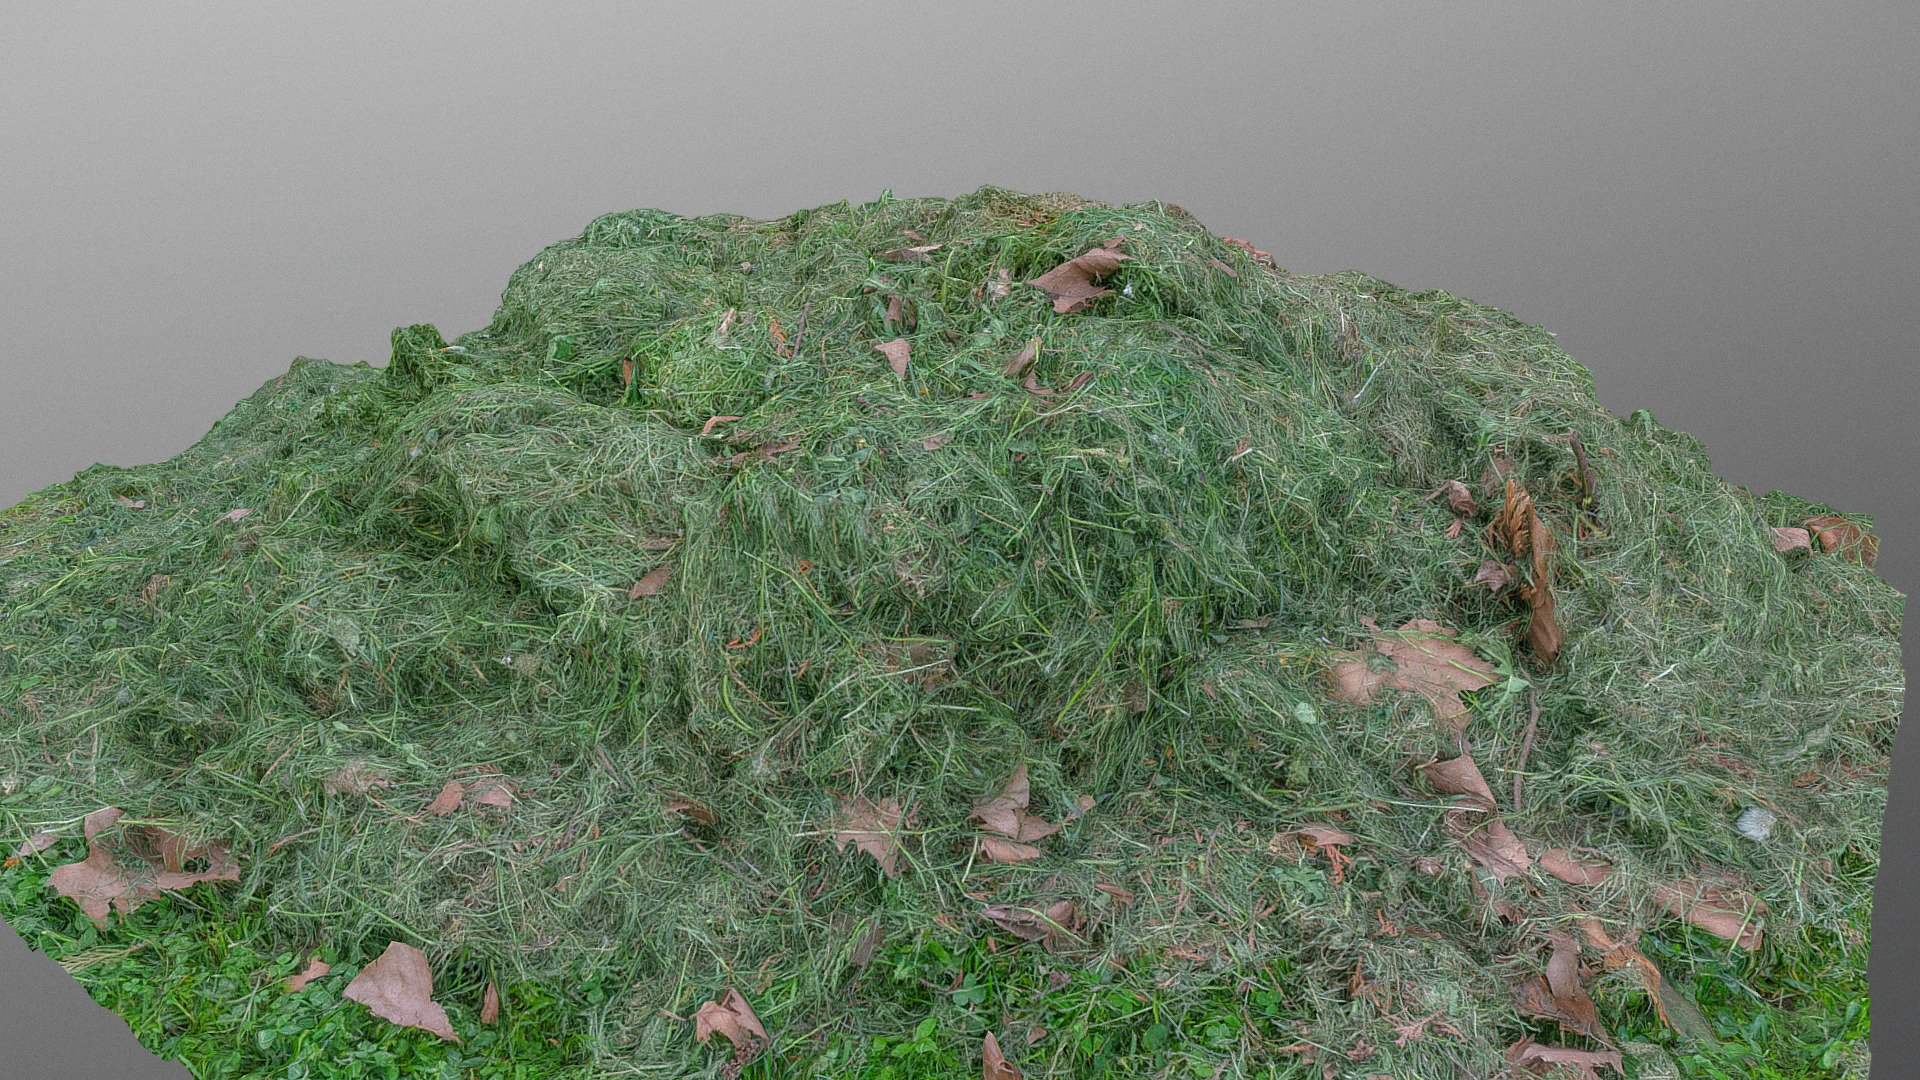 Heap pile of green Freshly Mown lawn cut grass with lawn mower

Photogrammetry scan 160x24MP, 3x16K textures + HD Normals, isolated from ground - Mown lawn cut grass heap - Buy Royalty Free 3D model by matousekfoto 3d model